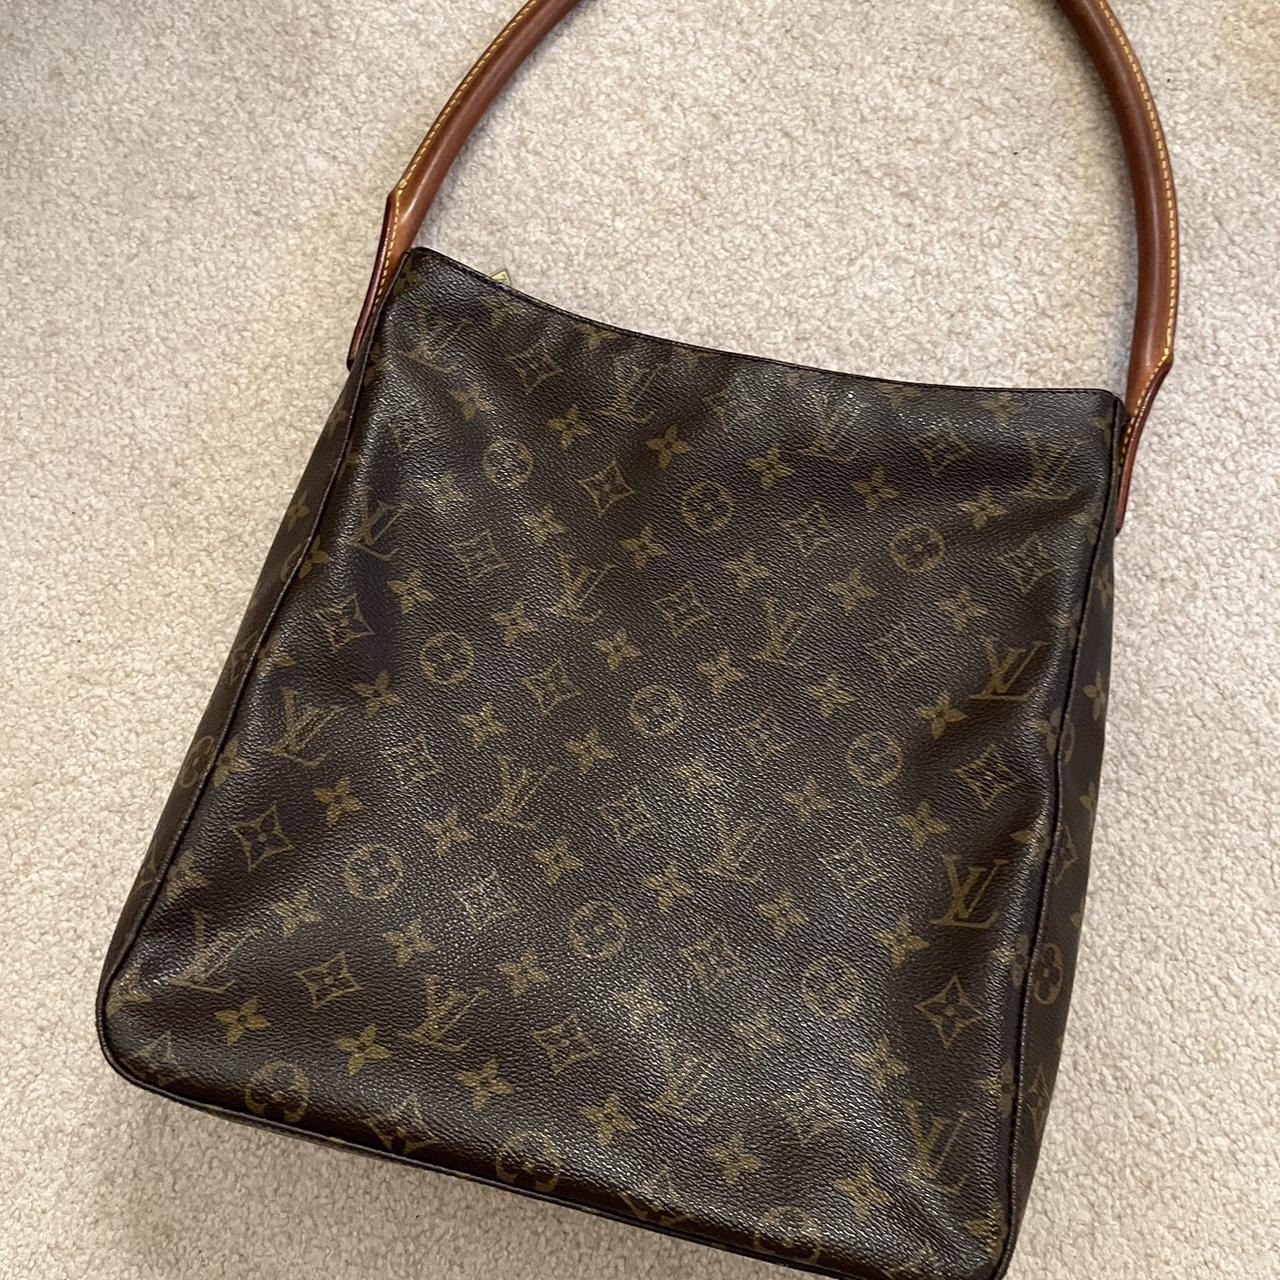 Vintage Louis Vuitton handbag from the early 2000s. - Depop